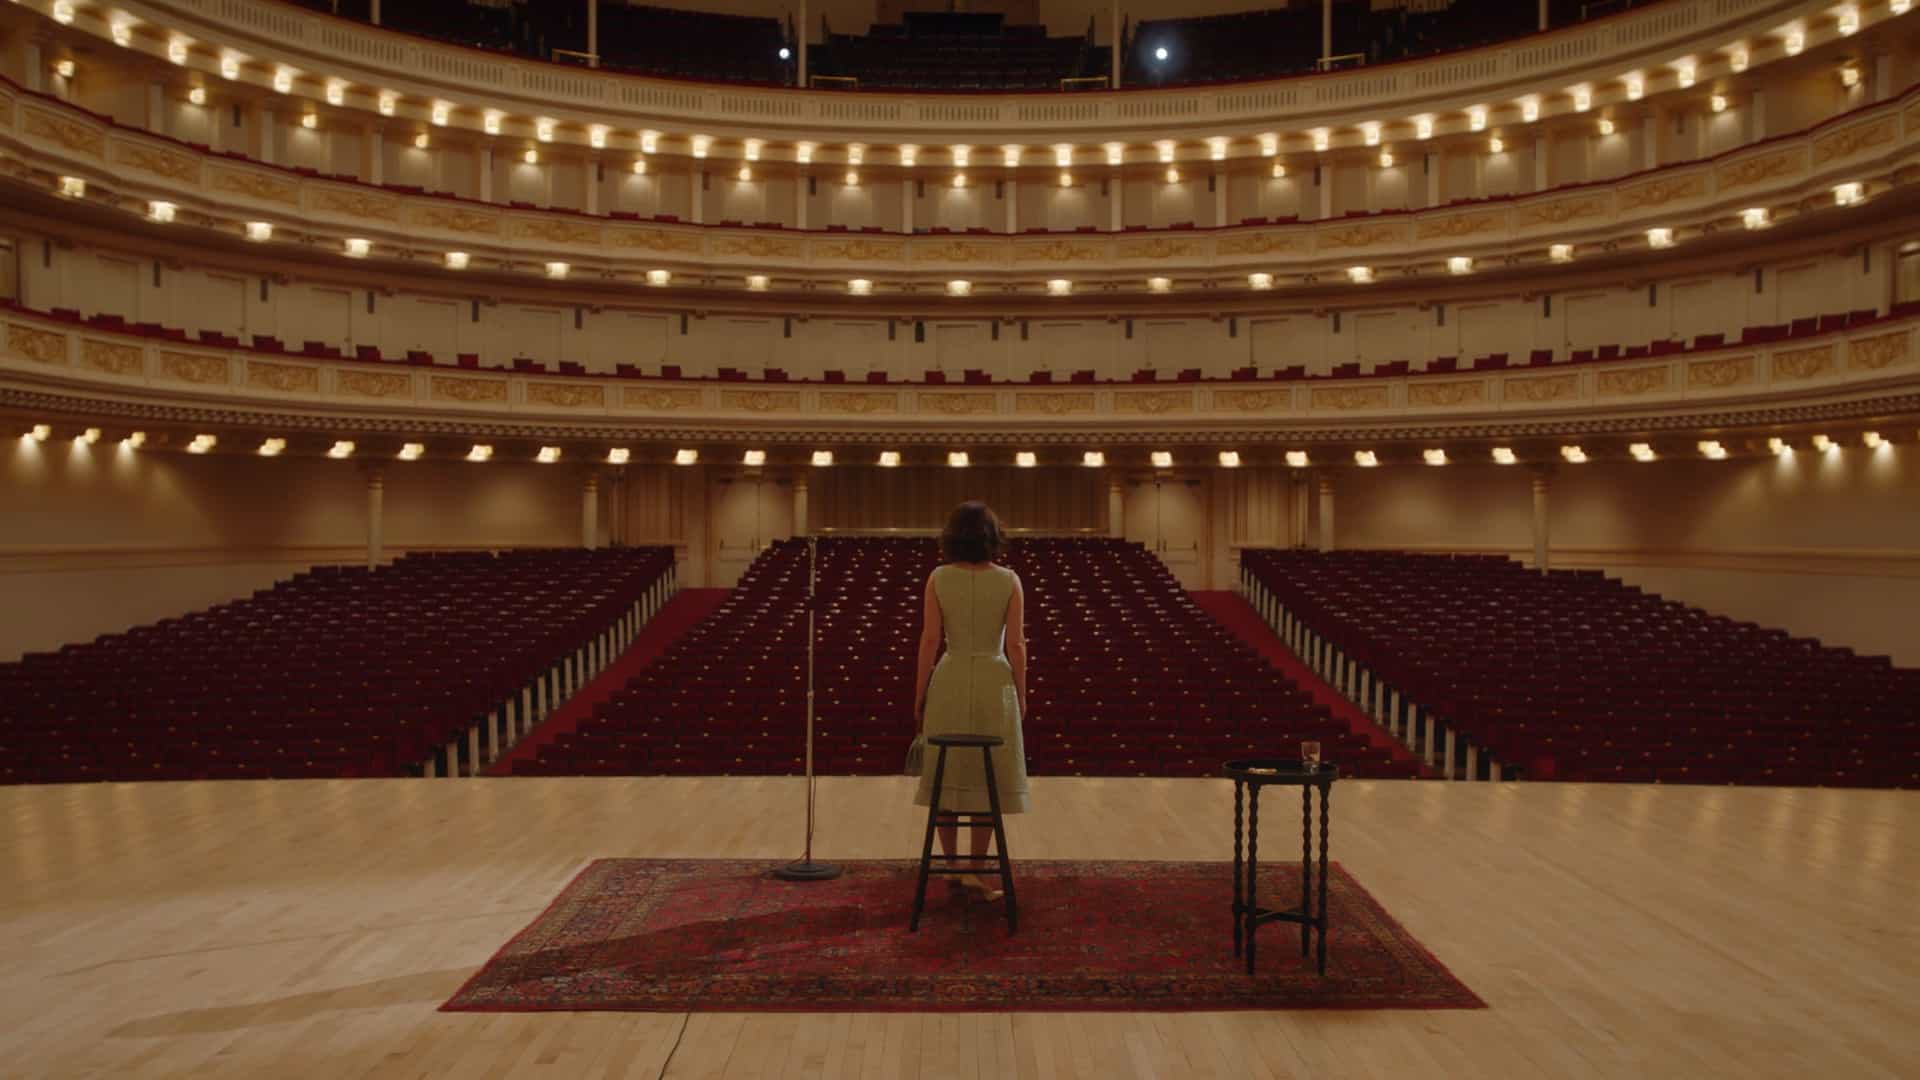 Miriam standing in Carnegie hall to a empty theater